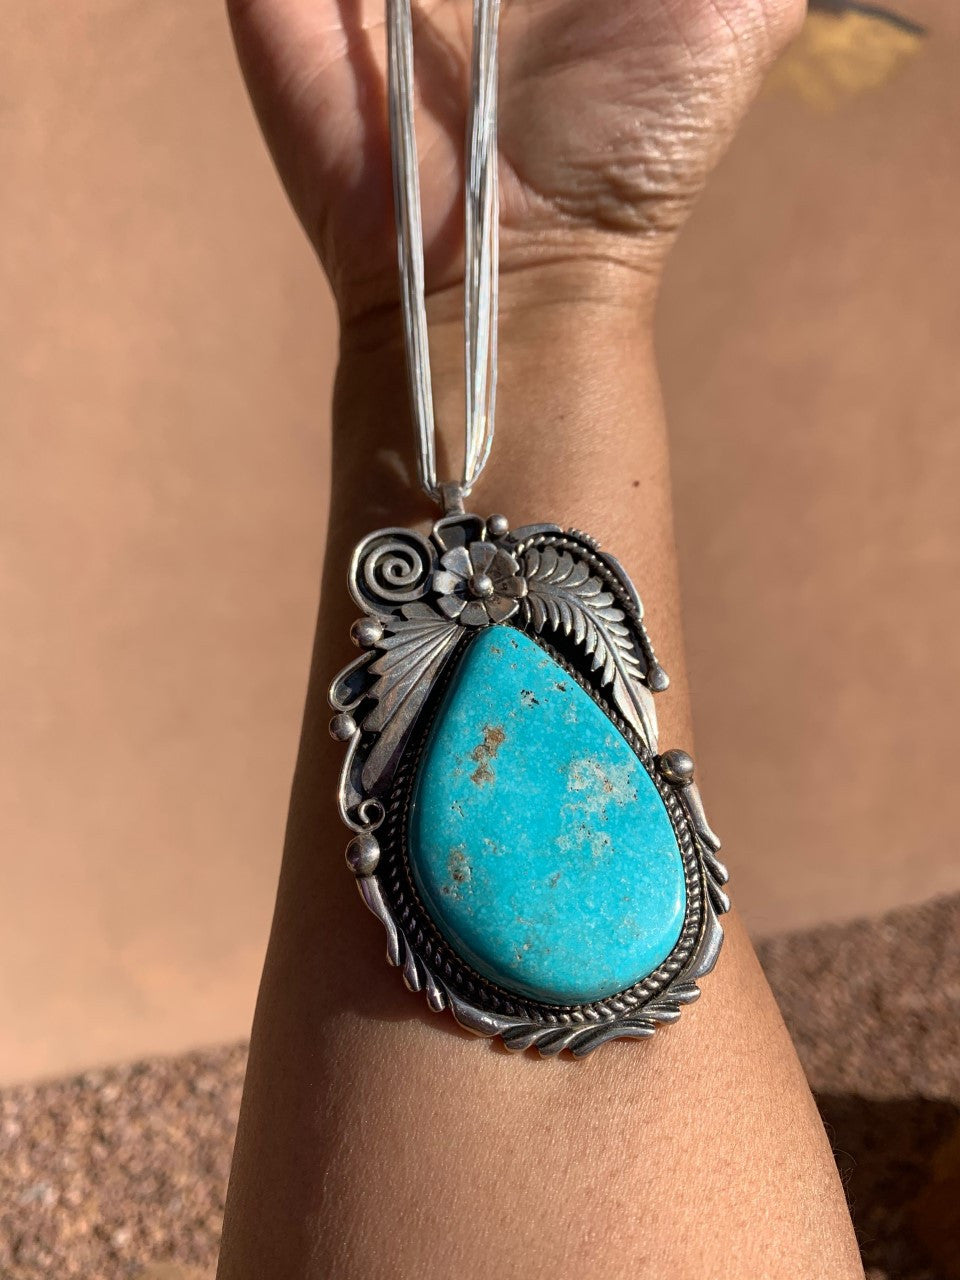 Old Pawn Tear Drop Turquoise Pendant